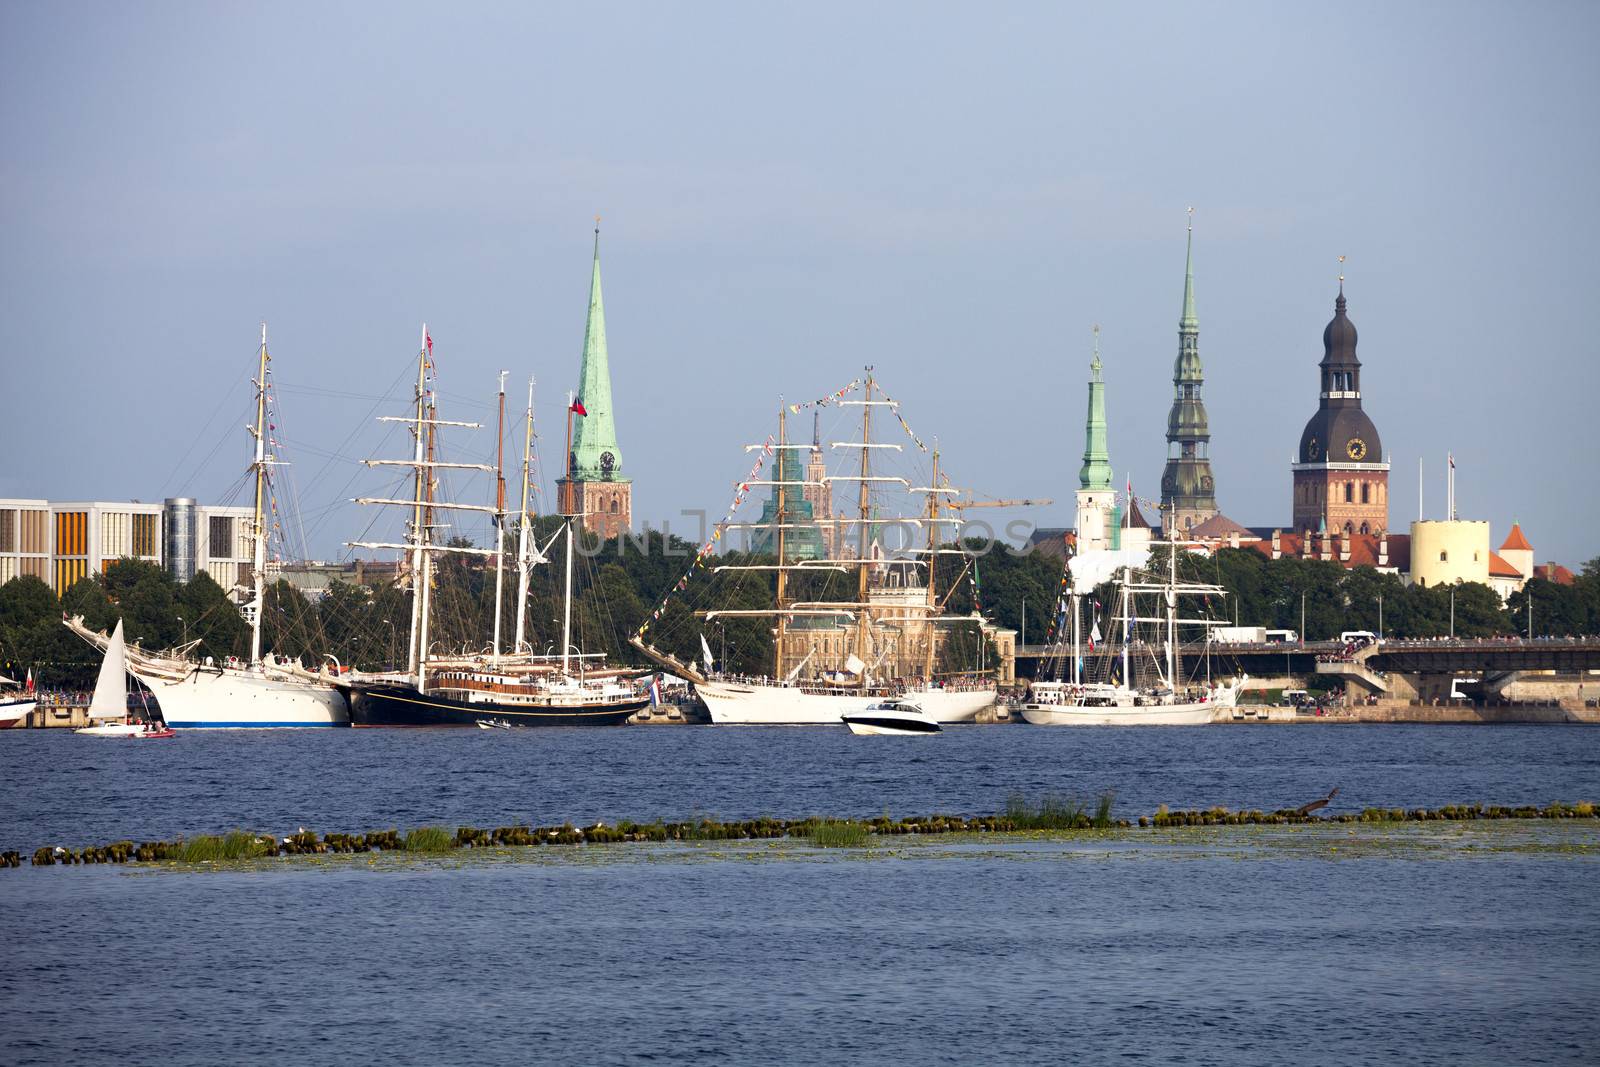 Tall ships in Riga by ints